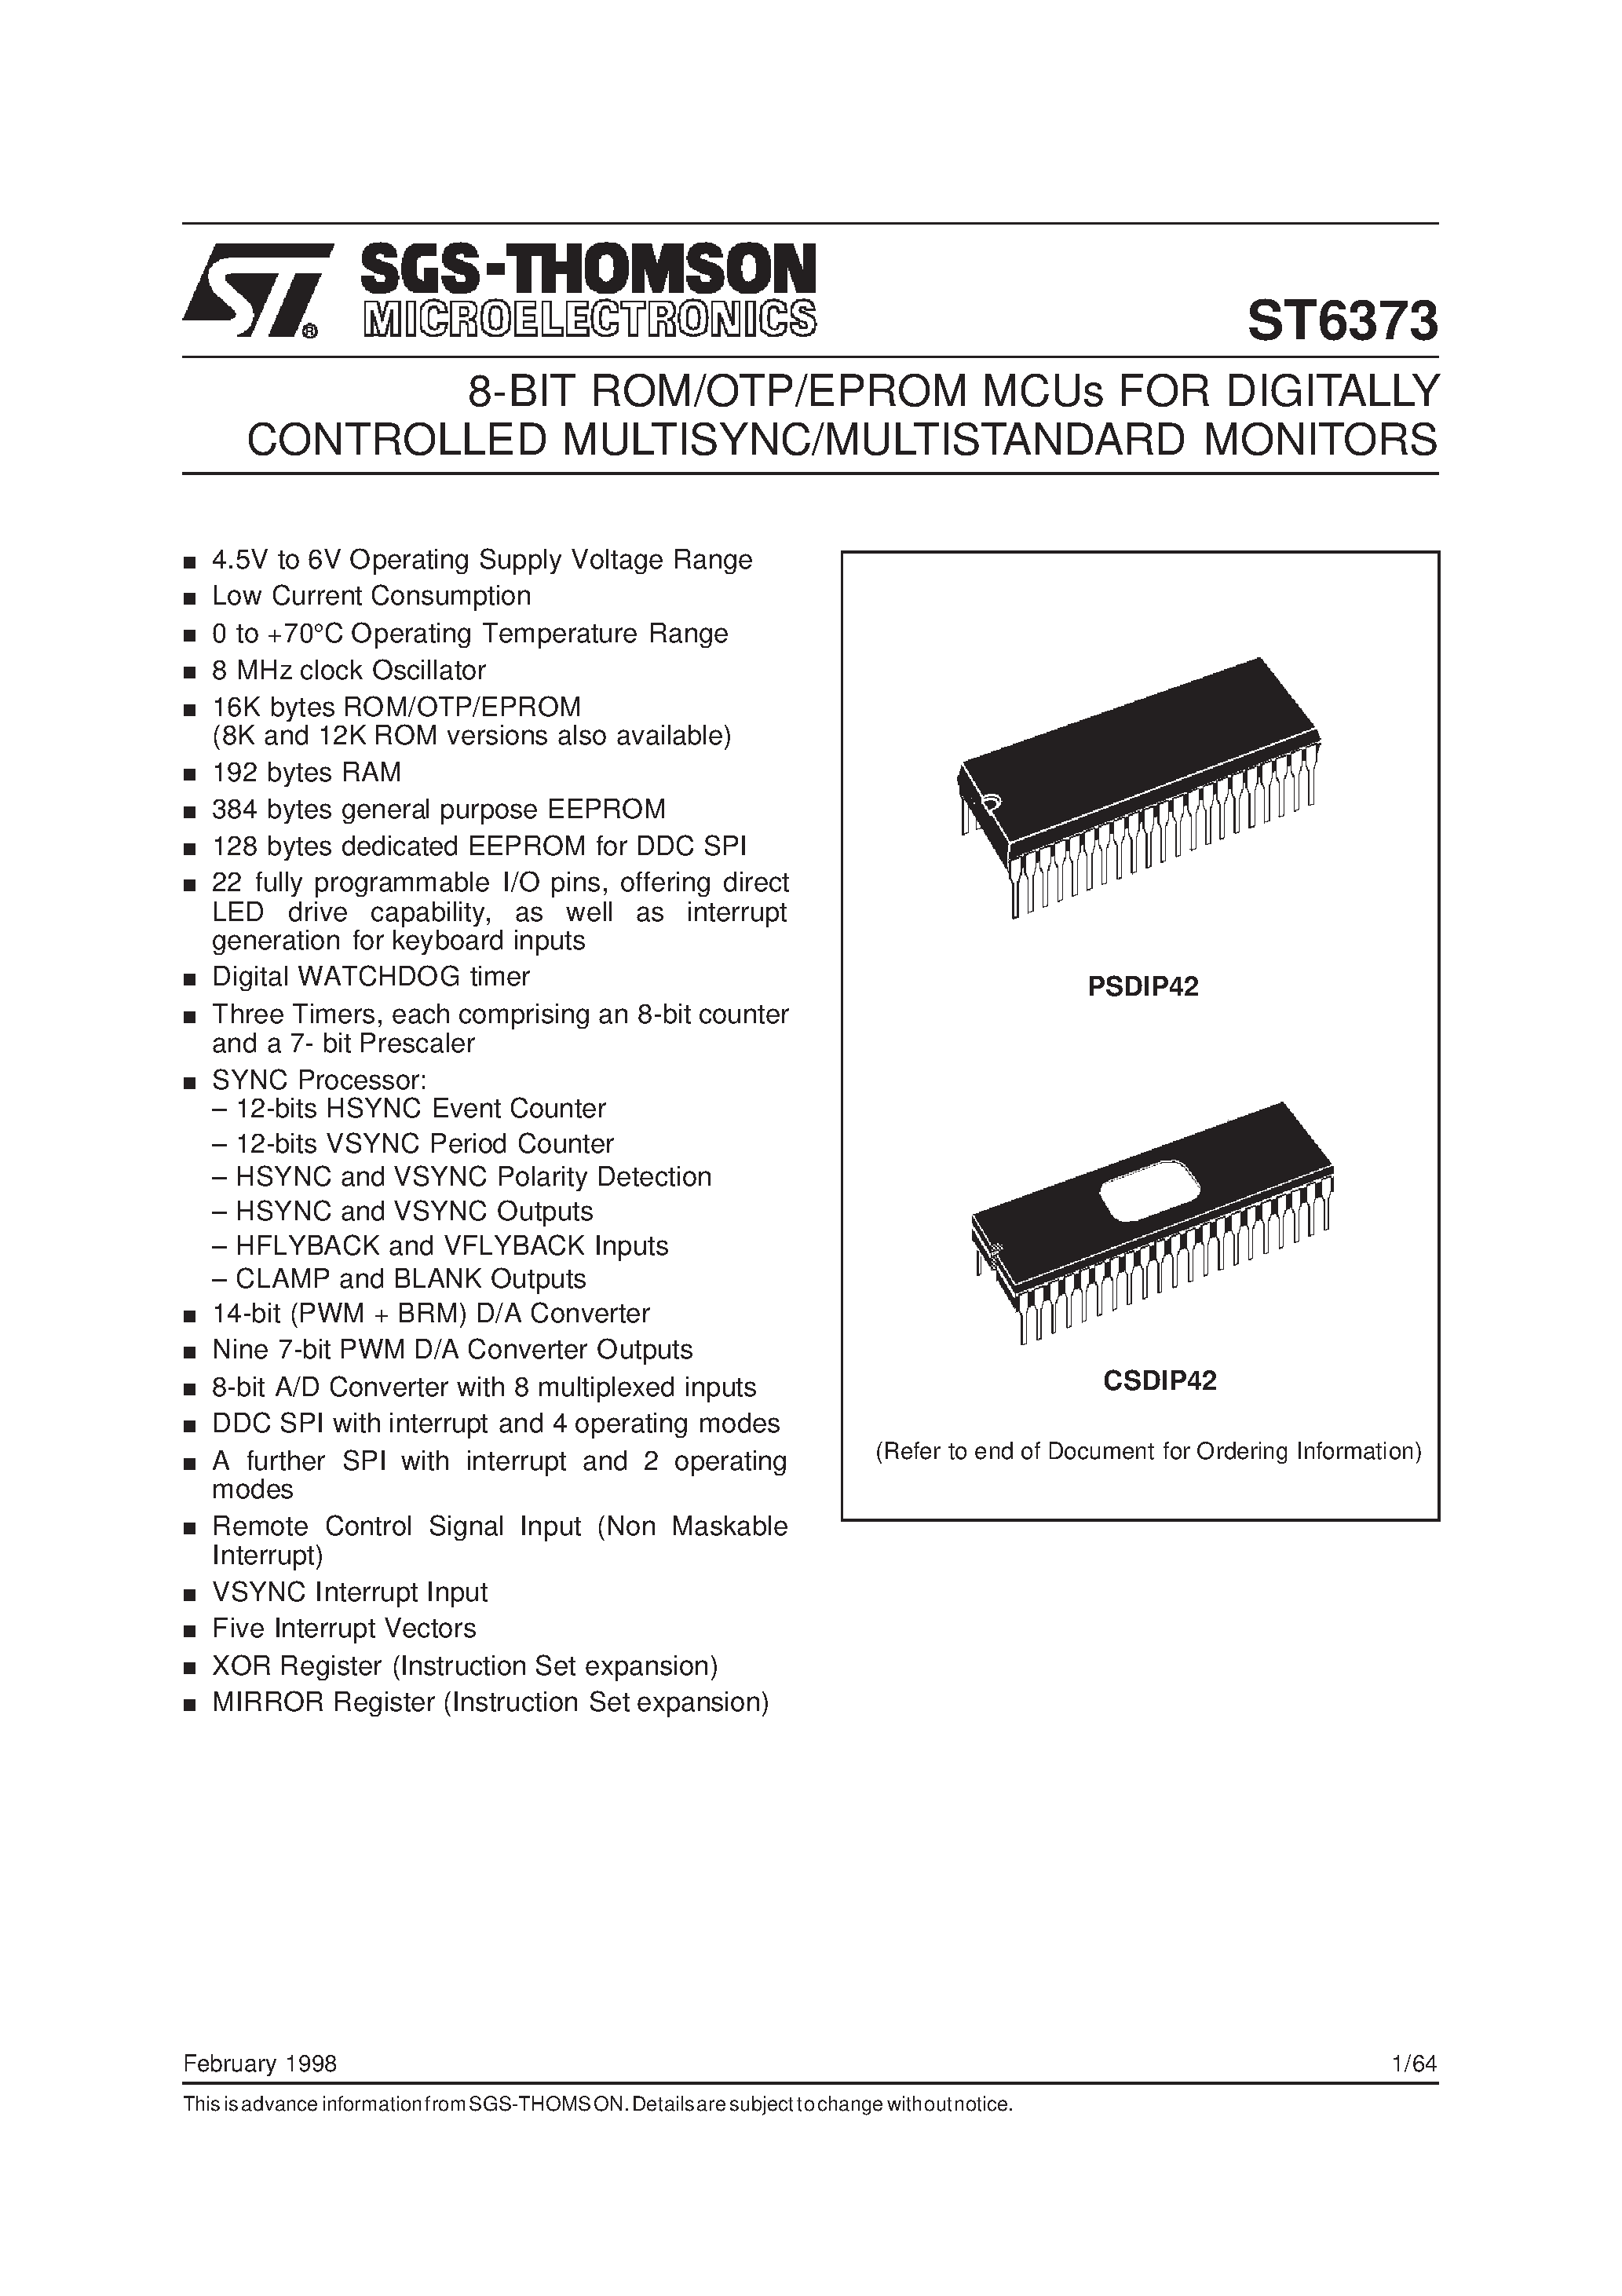 Datasheet ST63T73 - 8-BIT ROM/OTP/EPROM MCUs FOR DIGITALLY CONTROLLED MULTISYNC/MULTISTANDARD MONITORS page 1